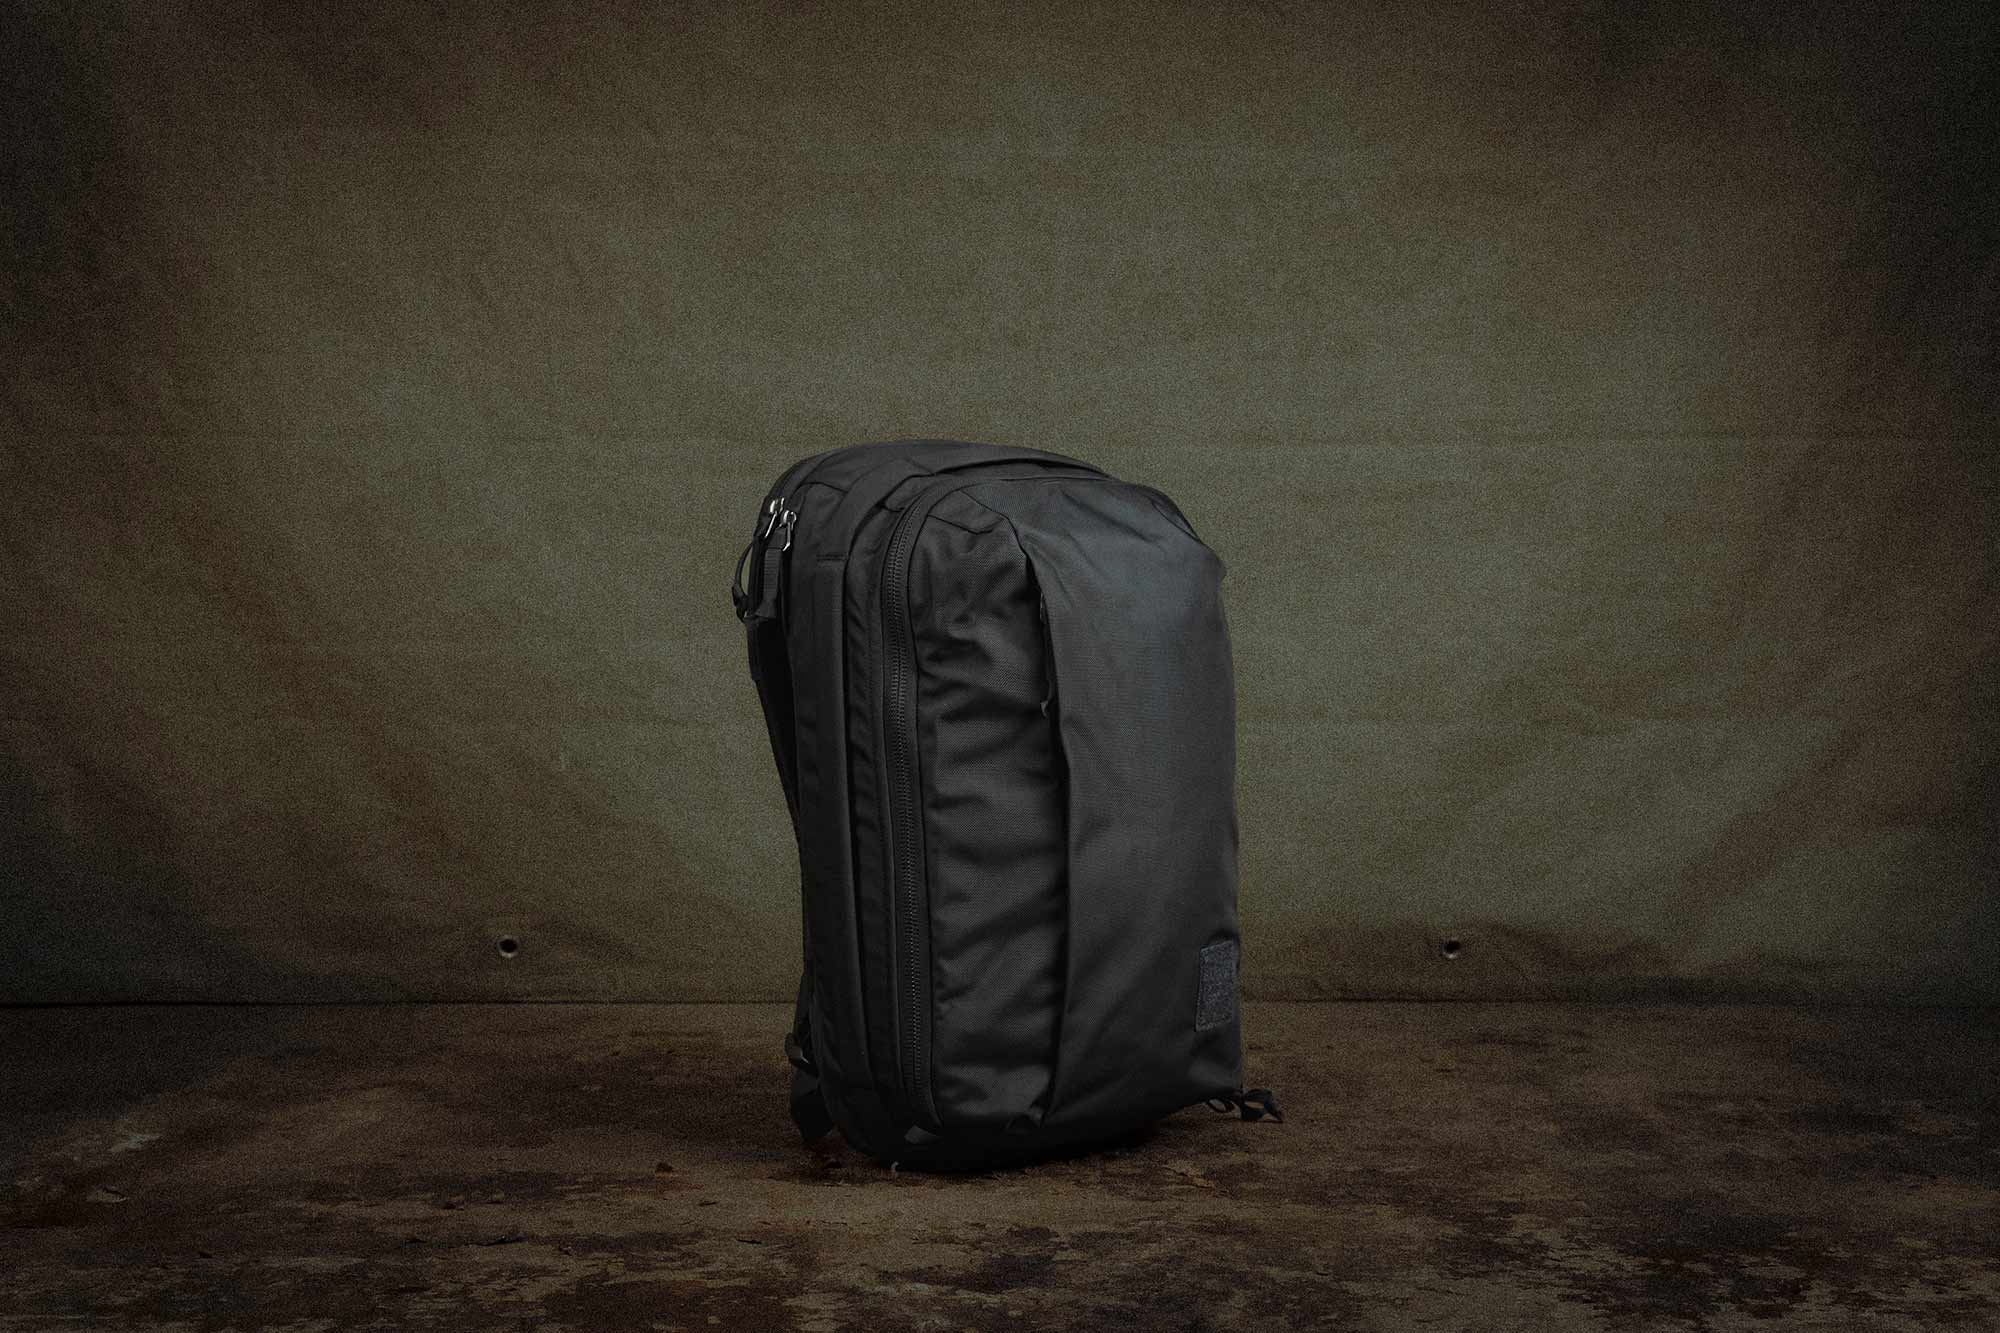 Evergoods Launches the CPL16, a Smaller Version of their Popular Backpack